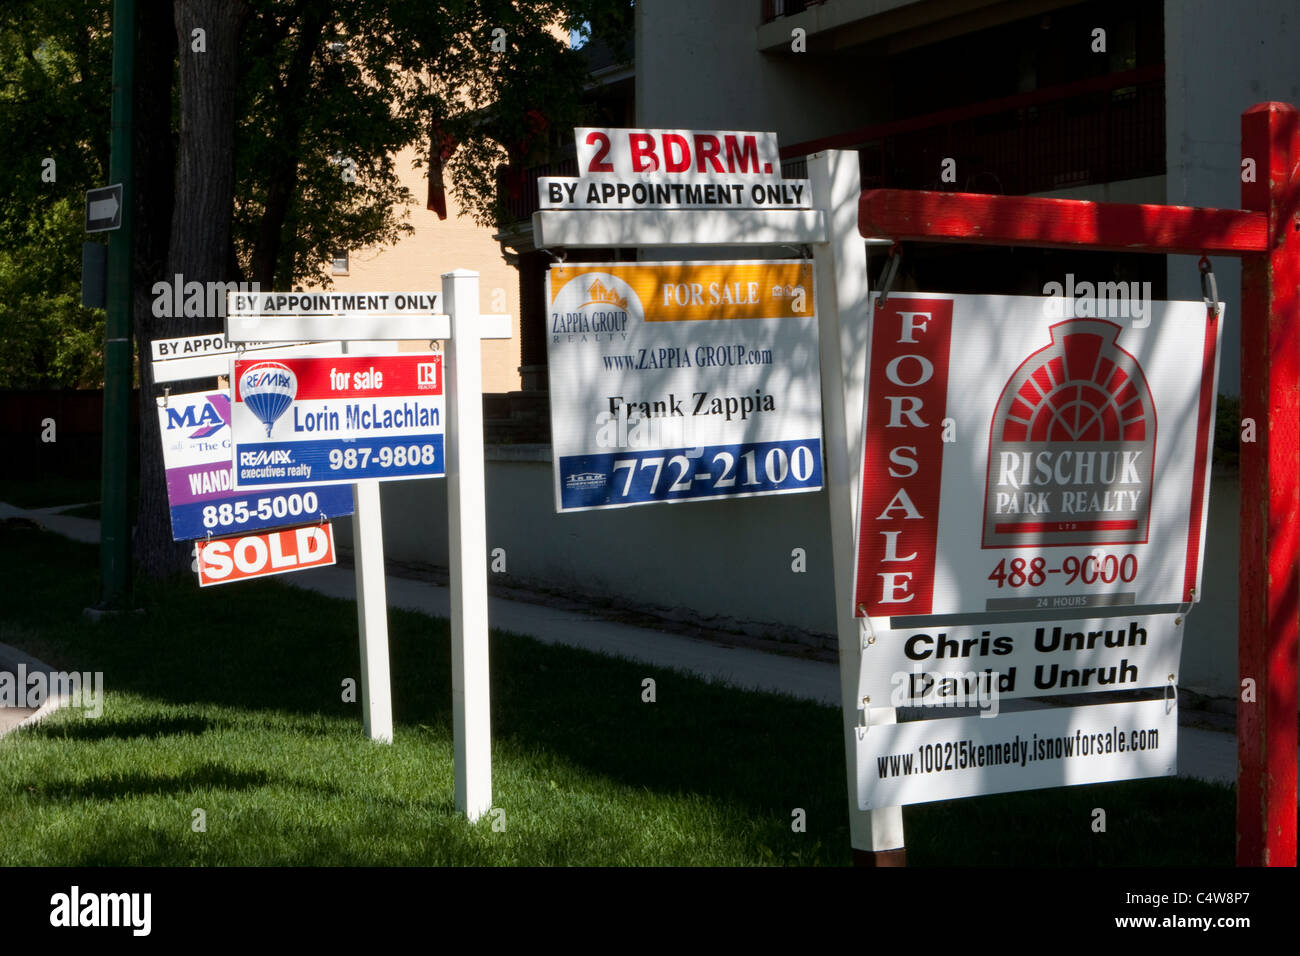 'For sale' signs for Maximum realty, Re/Max, Zappia Group realty and Rischuk Park realty are seen next to each other in Winnipeg Stock Photo